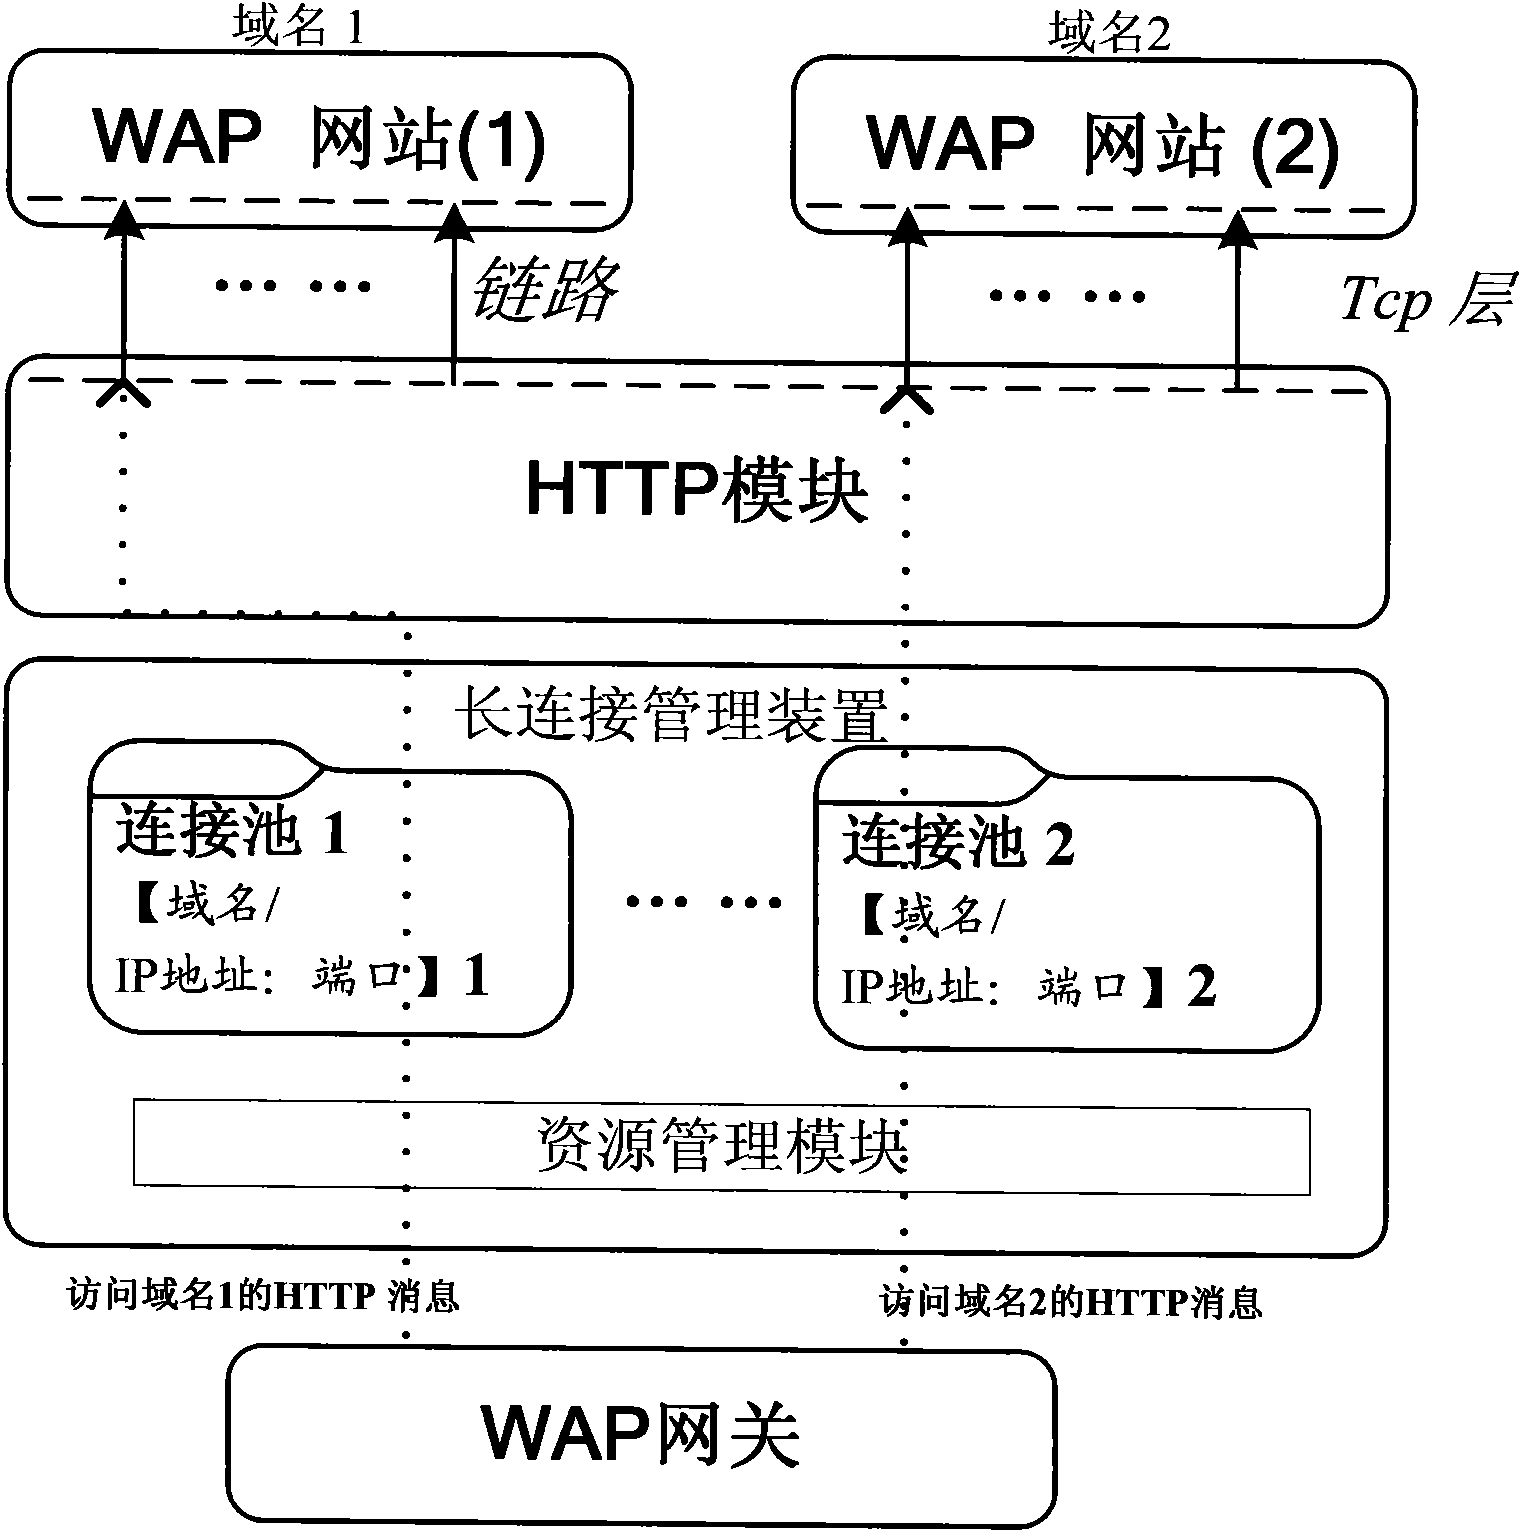 Long-connection management device and method for managing link resources of long-connection communication